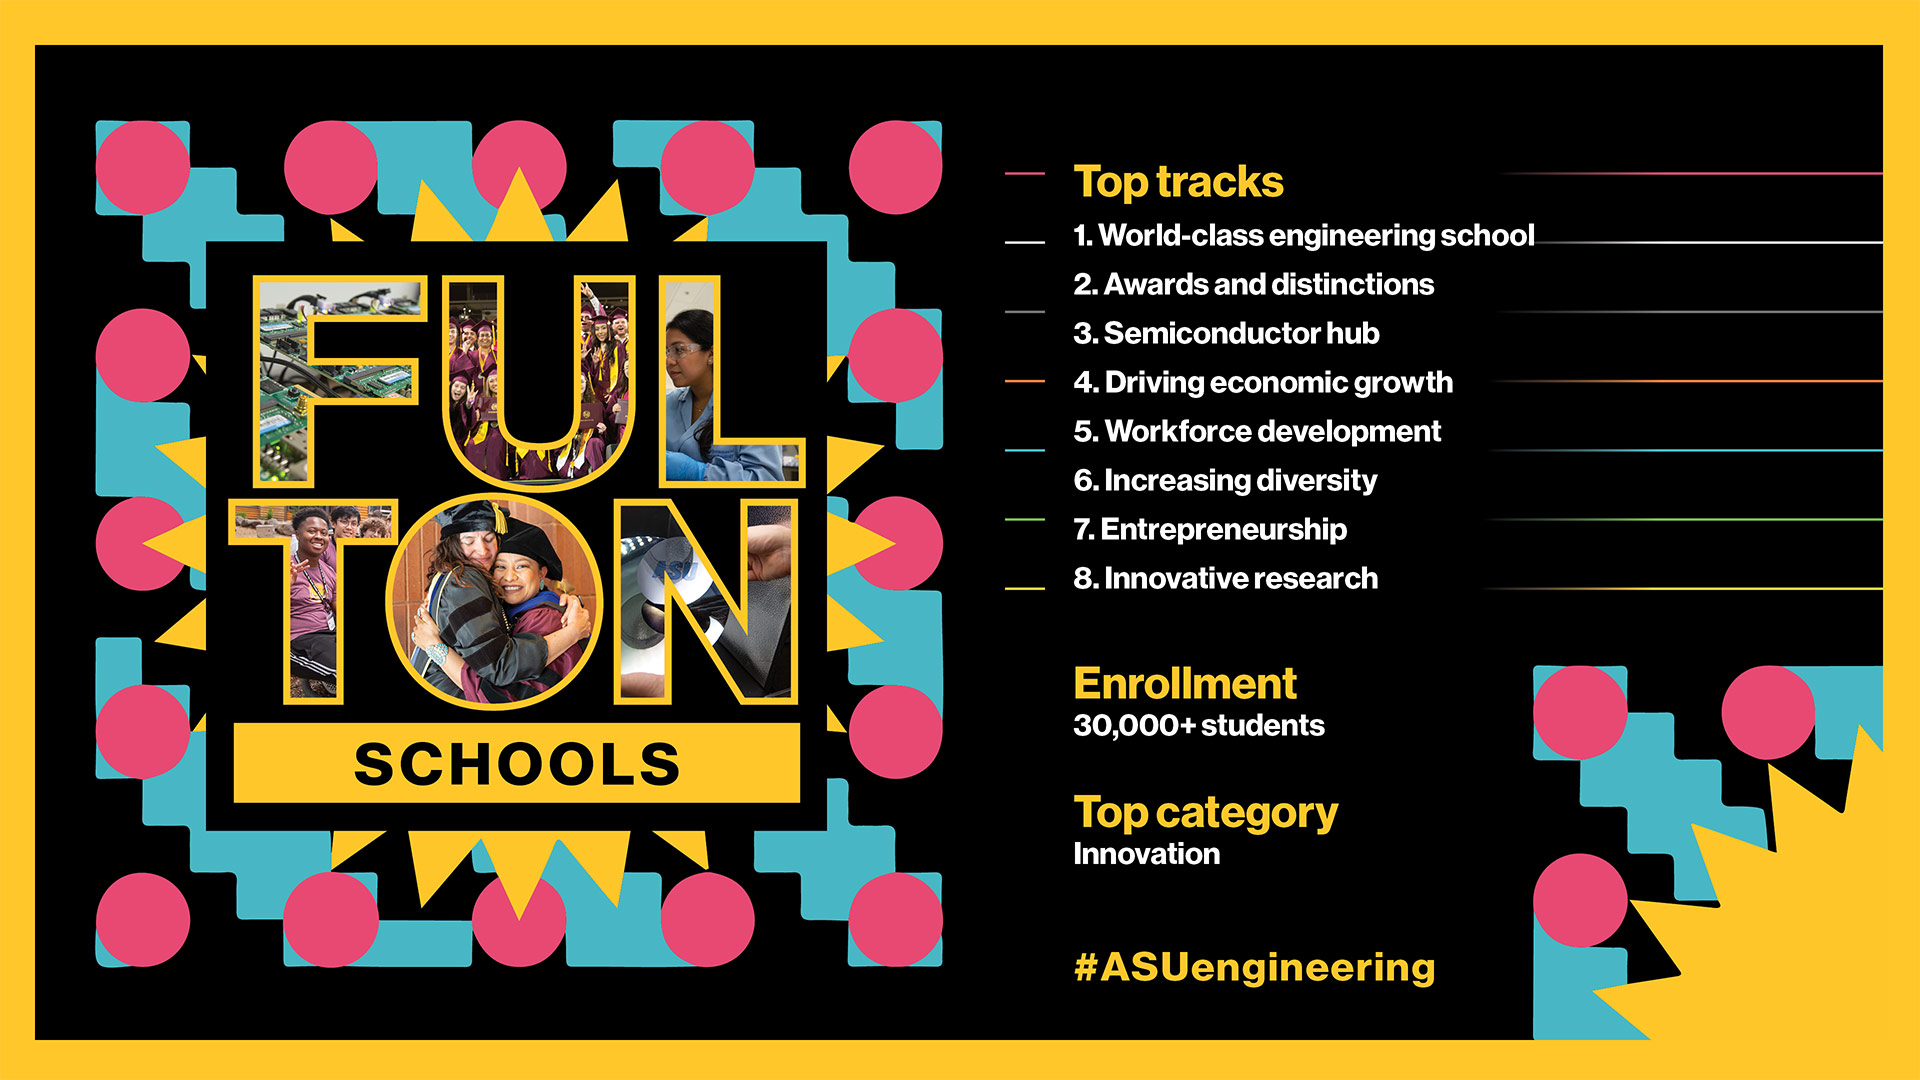 Fulton Schools Year in Review. Top tracks: 1. World-class engineering school, 2. Awards and distinctions, 3. Semiconductor hub, 4. Driving economic growth, 5. Workforce development, 6. Increasing diversity, 7. Entrepreneurship, 8. Innovative research. Enrollment: 30,000+ students. Top category: Innovation. #ASUengineering